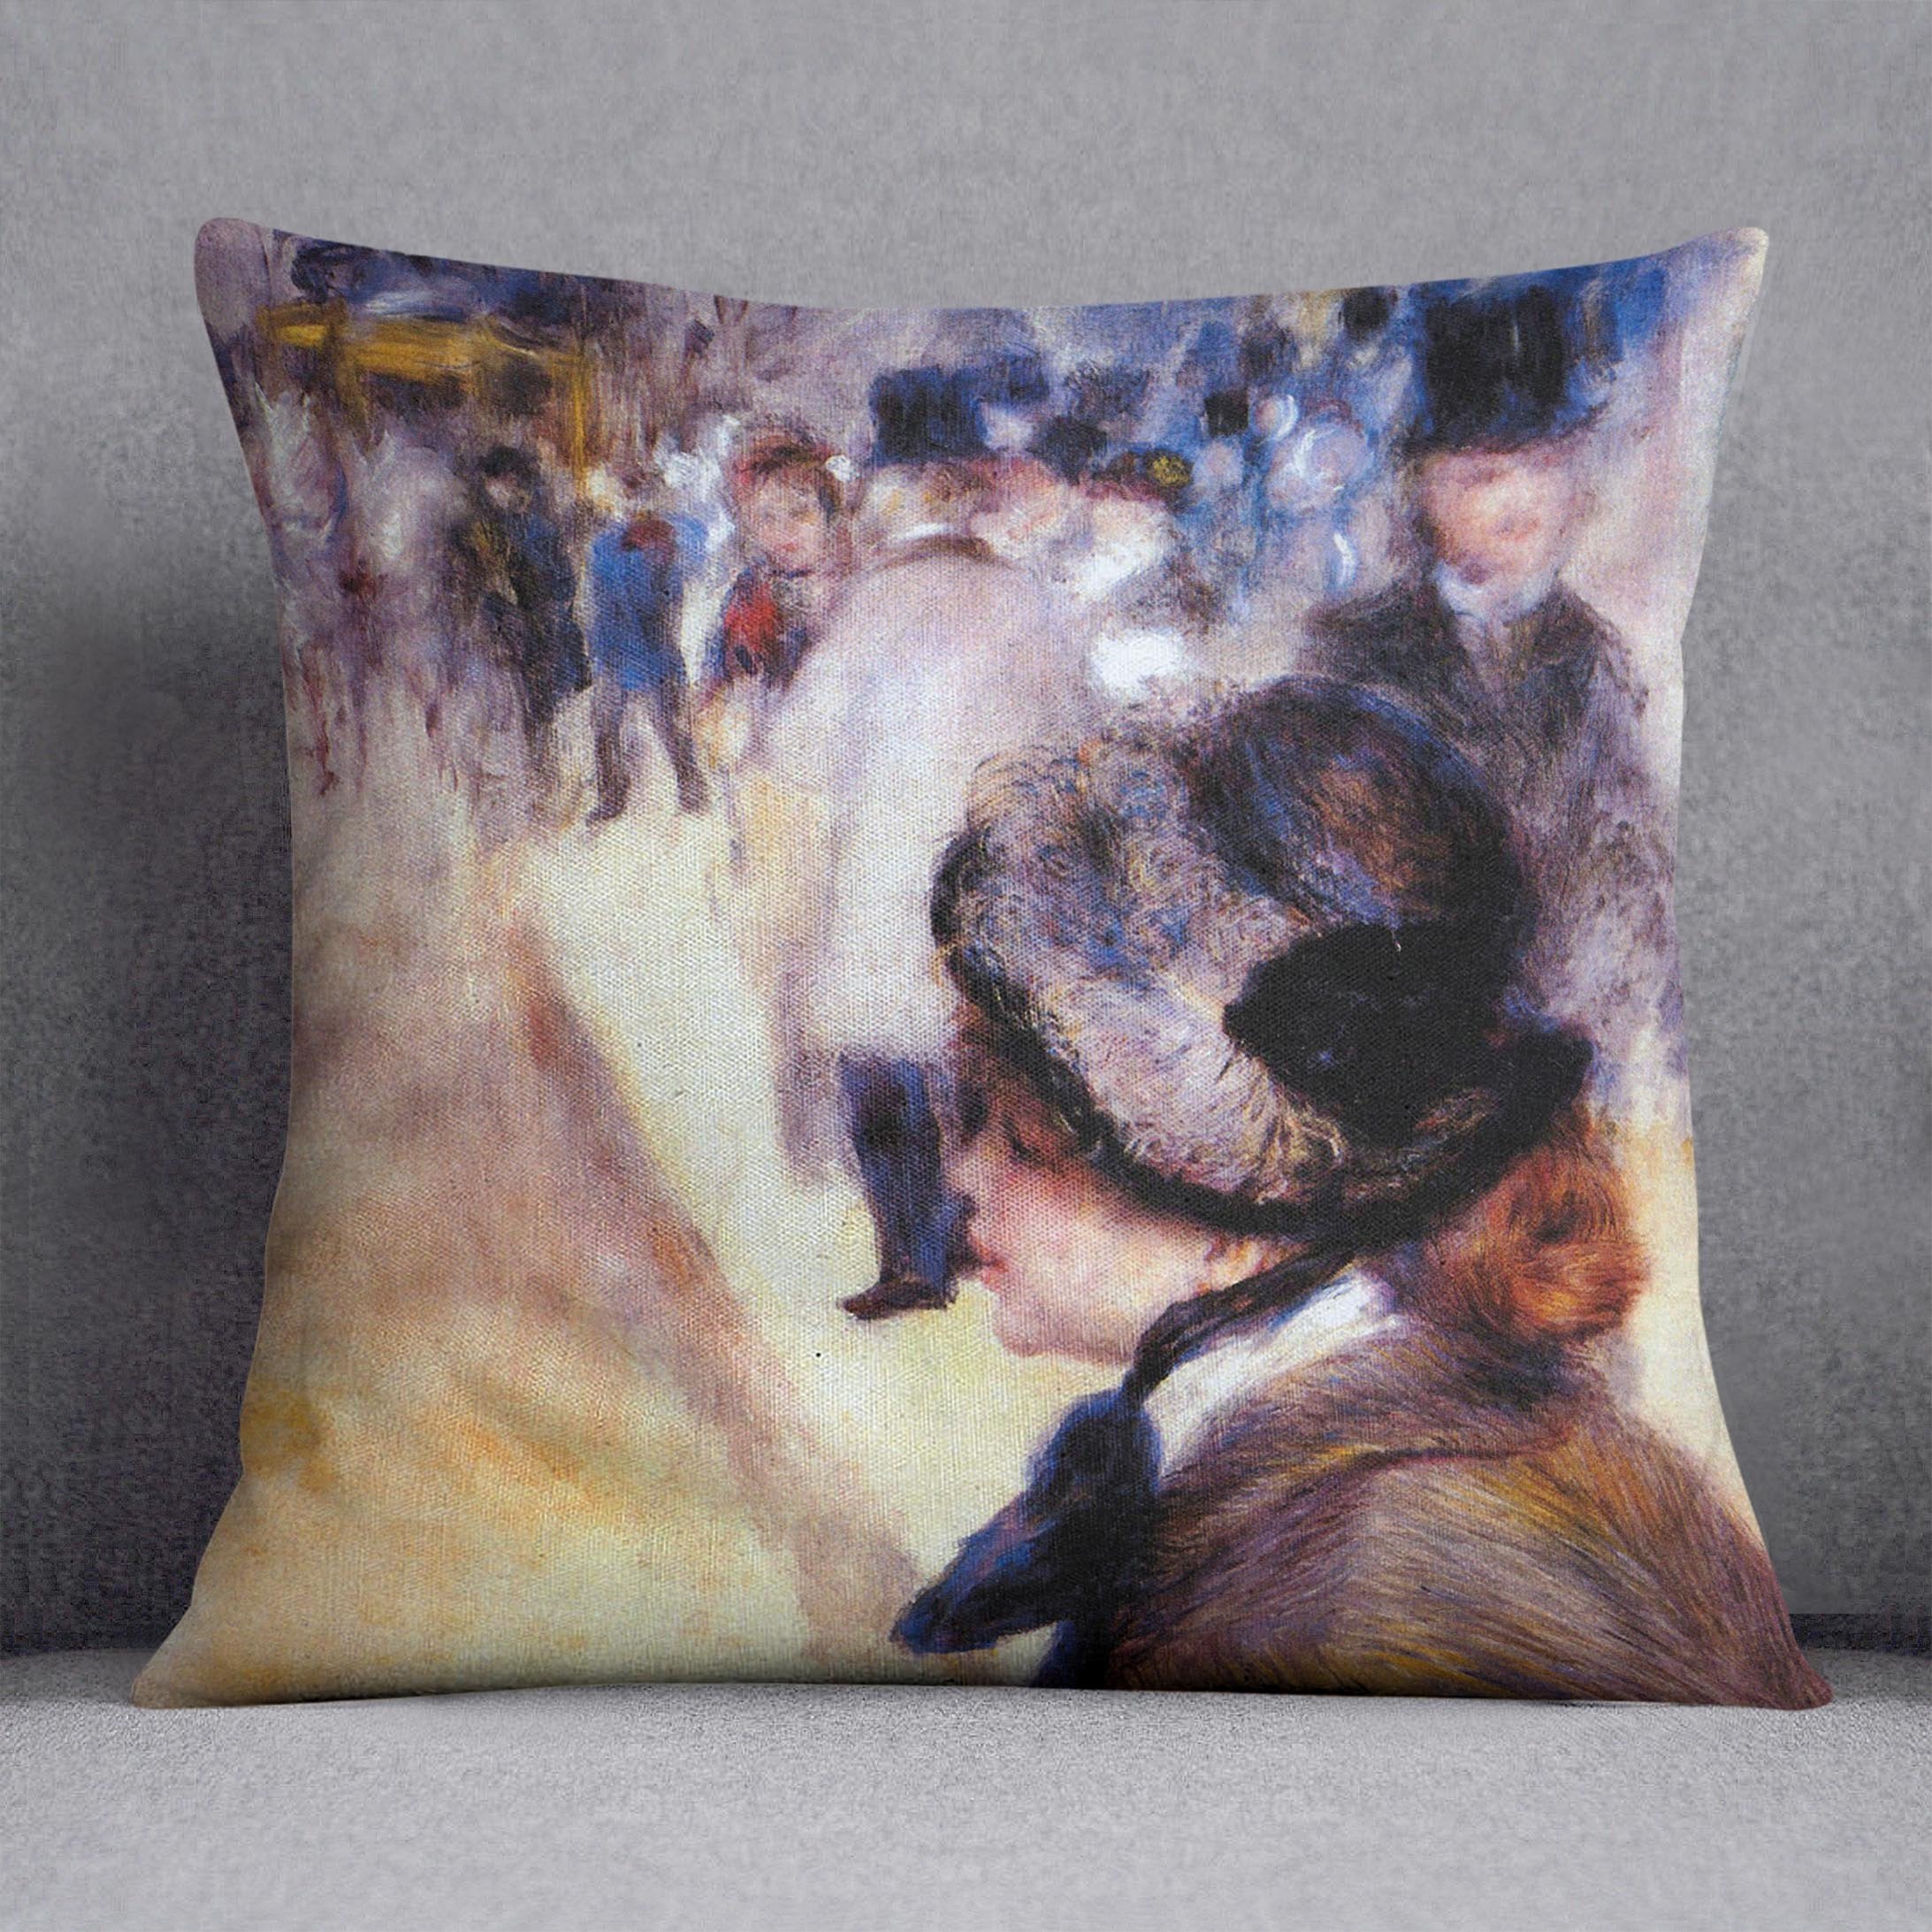 The place Clichy by Renoir Throw Pillow